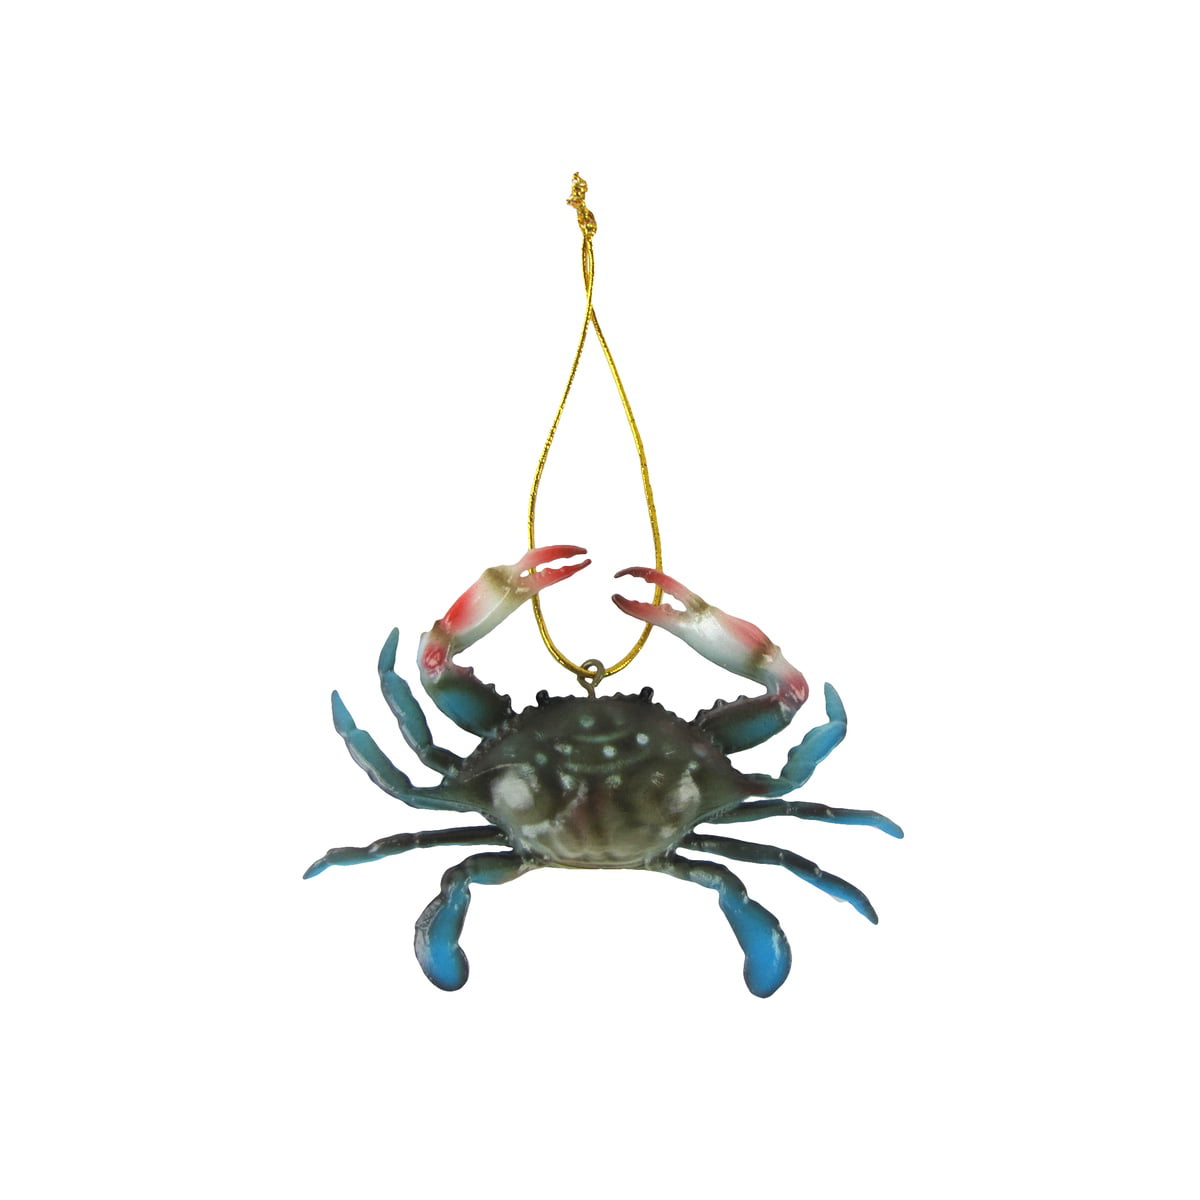 Blue Crab metal & glass yard or patio decor with Bell Chime